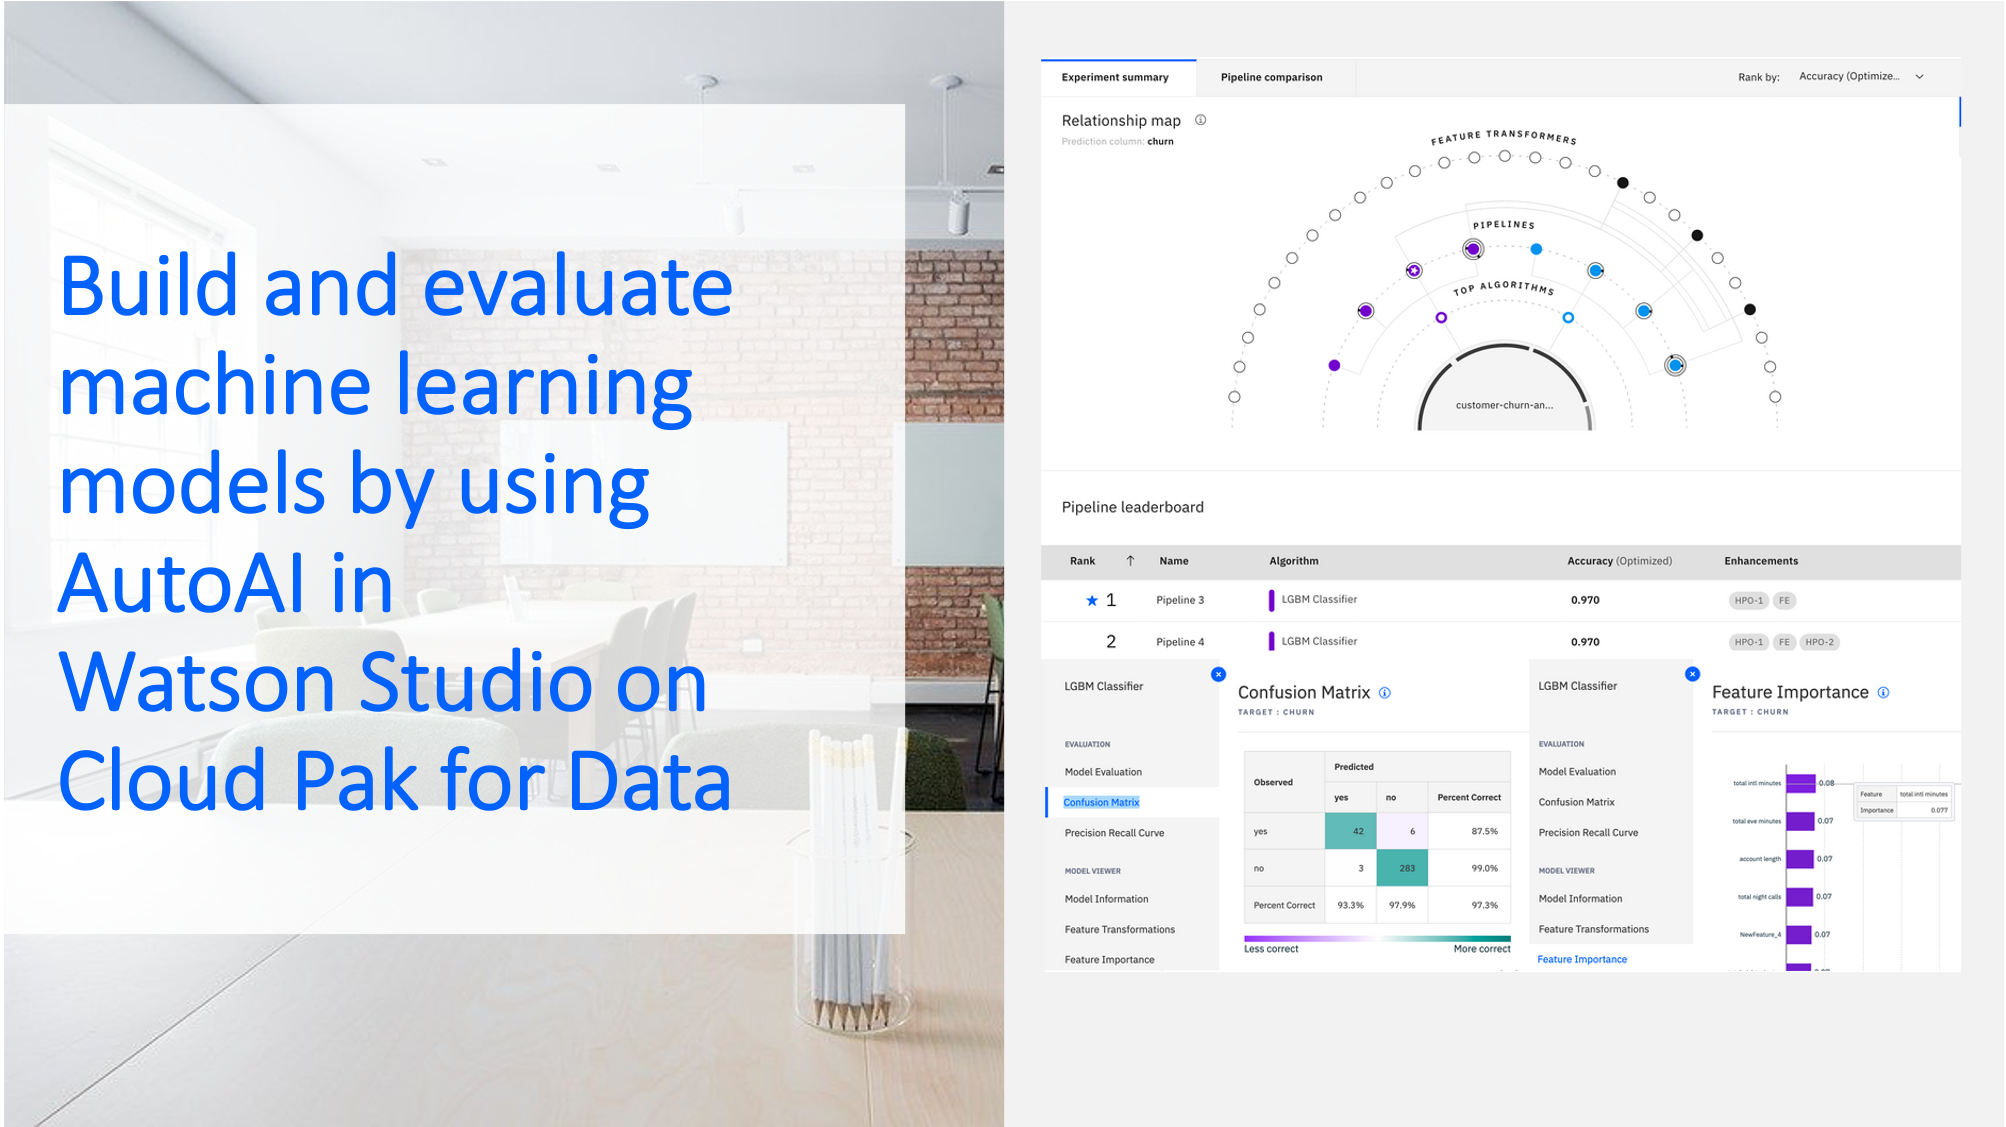 Build-and-evaluate-machine-learning-models-by-using-AutoAI-in-Watson-Studio-on-Cloud-Pak-for-Data